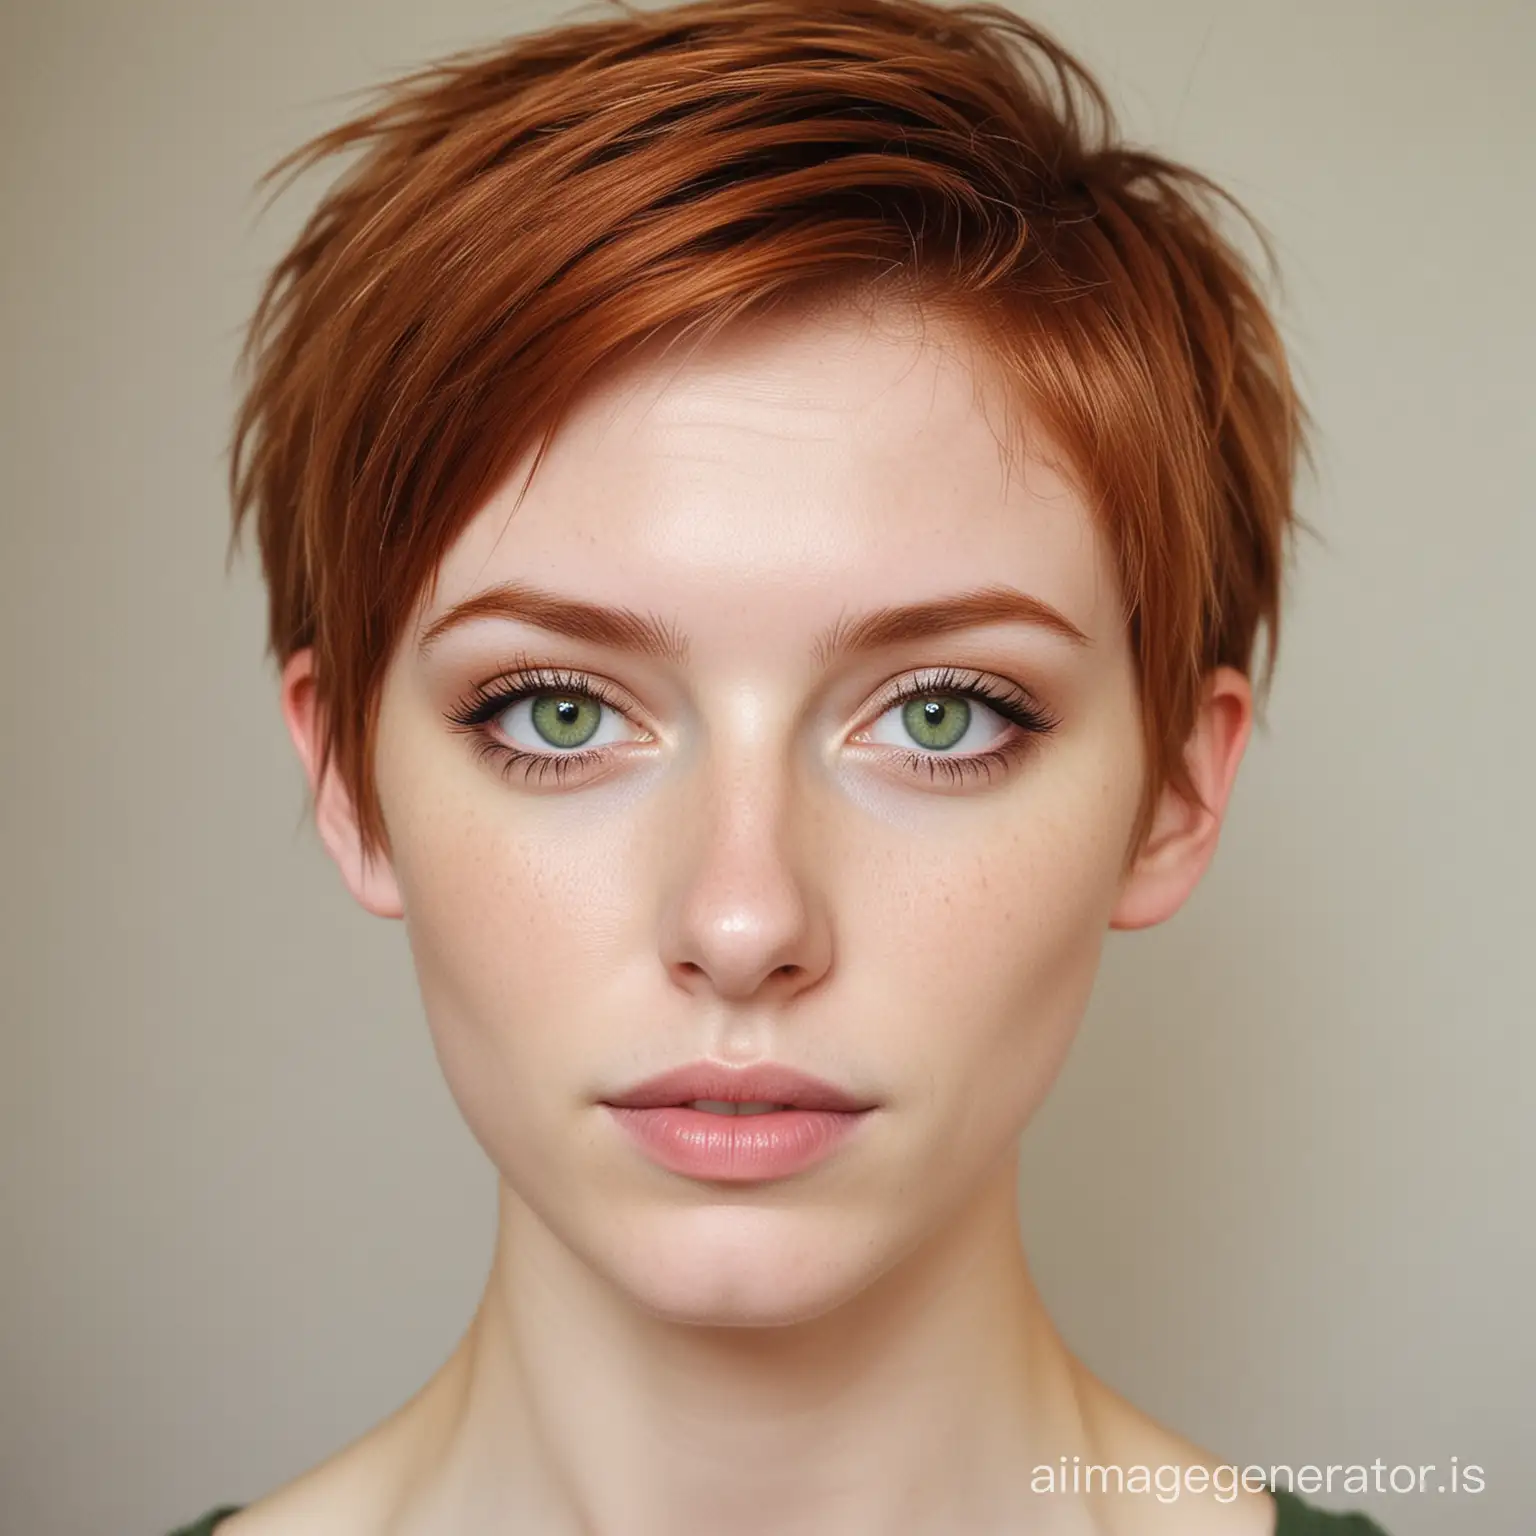 Ethereal-Skinny-Girl-with-Short-Ginger-Hair-and-Green-Eyes